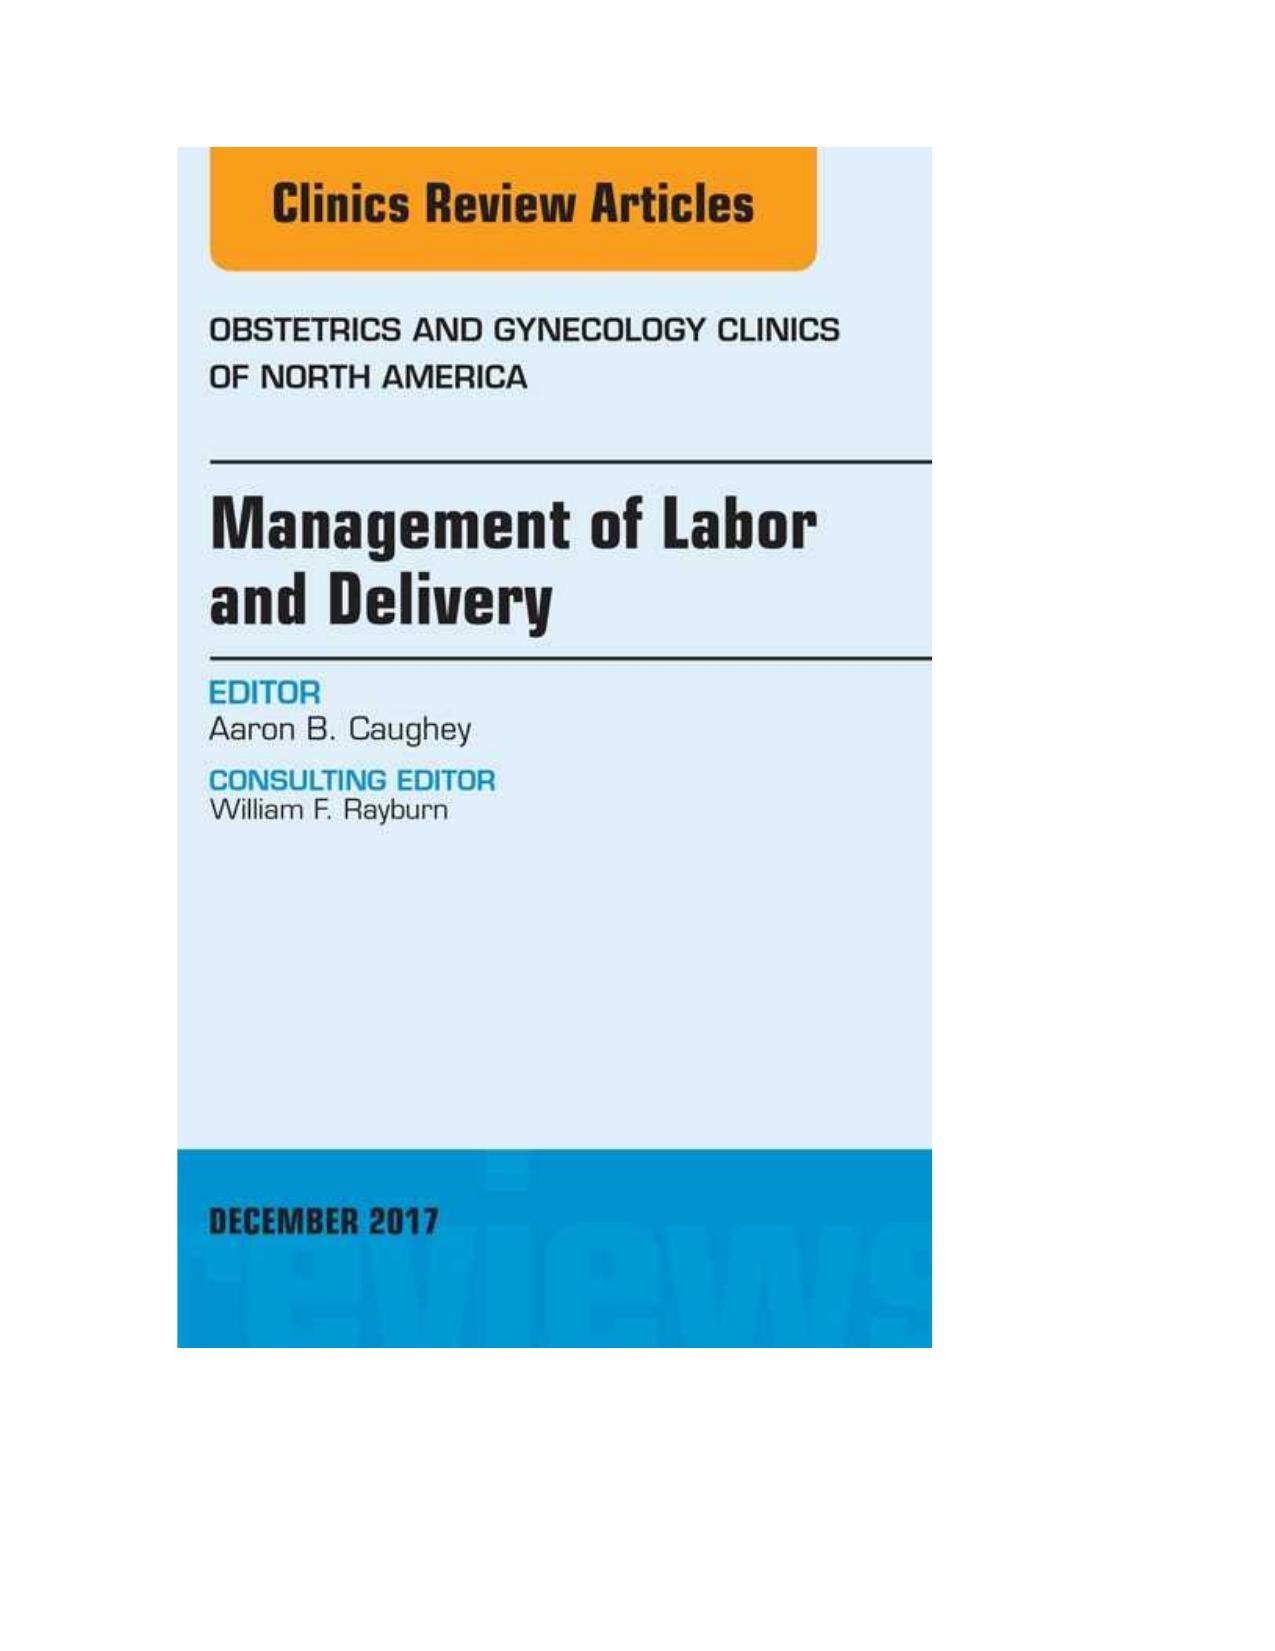 Management of Labor and Delivery, An Issue of Obstetrics and Gynecology Clinics 2017